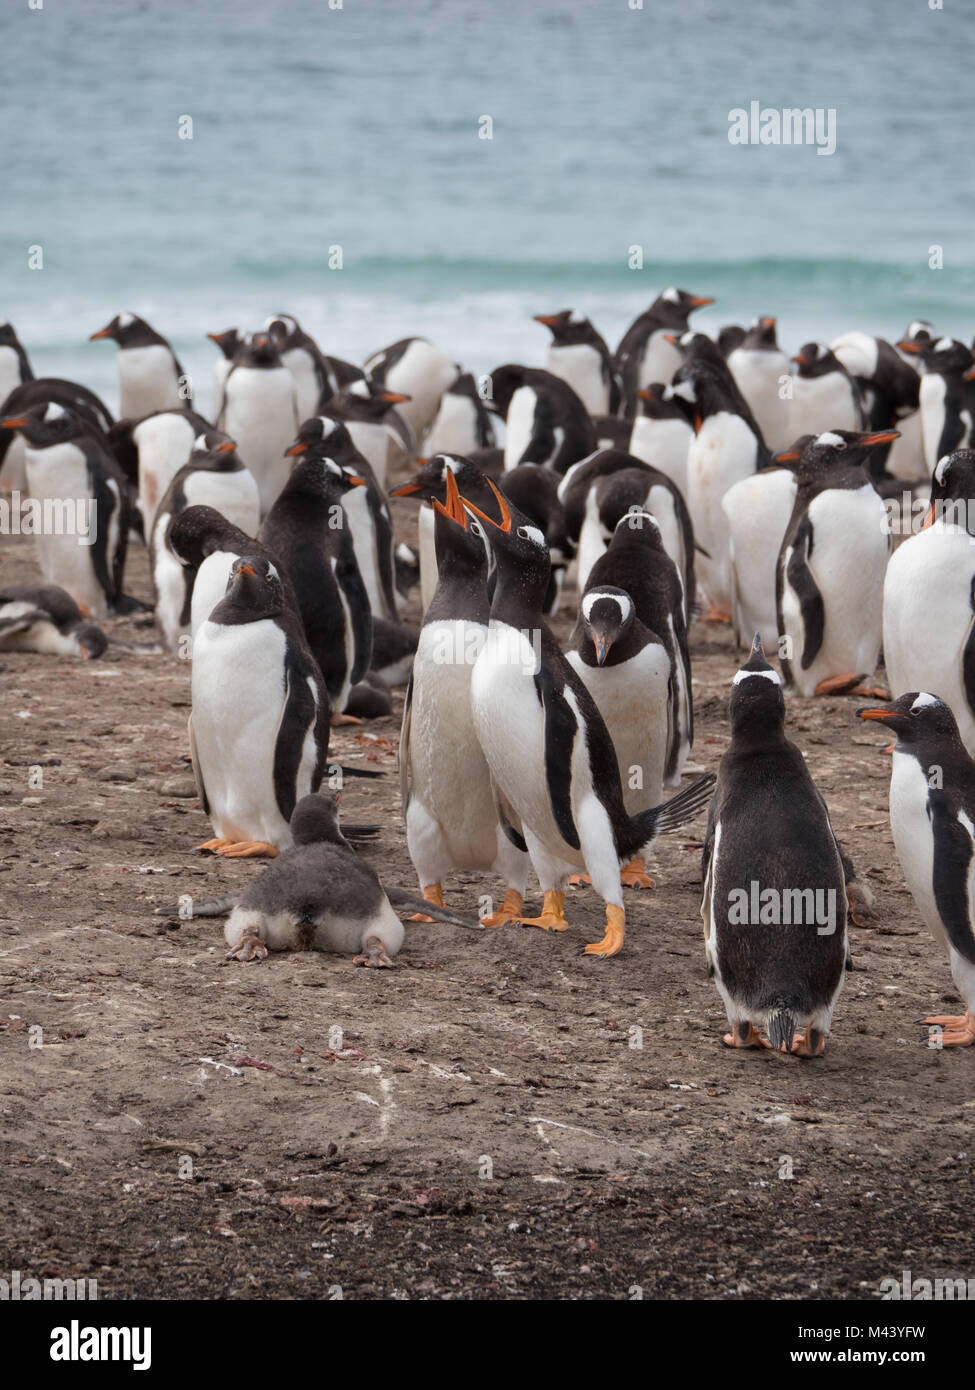 A pair of gentoo penguins vocalizing, a baby penguin on its belly and other gentoos preening on the beach. Stock Photo